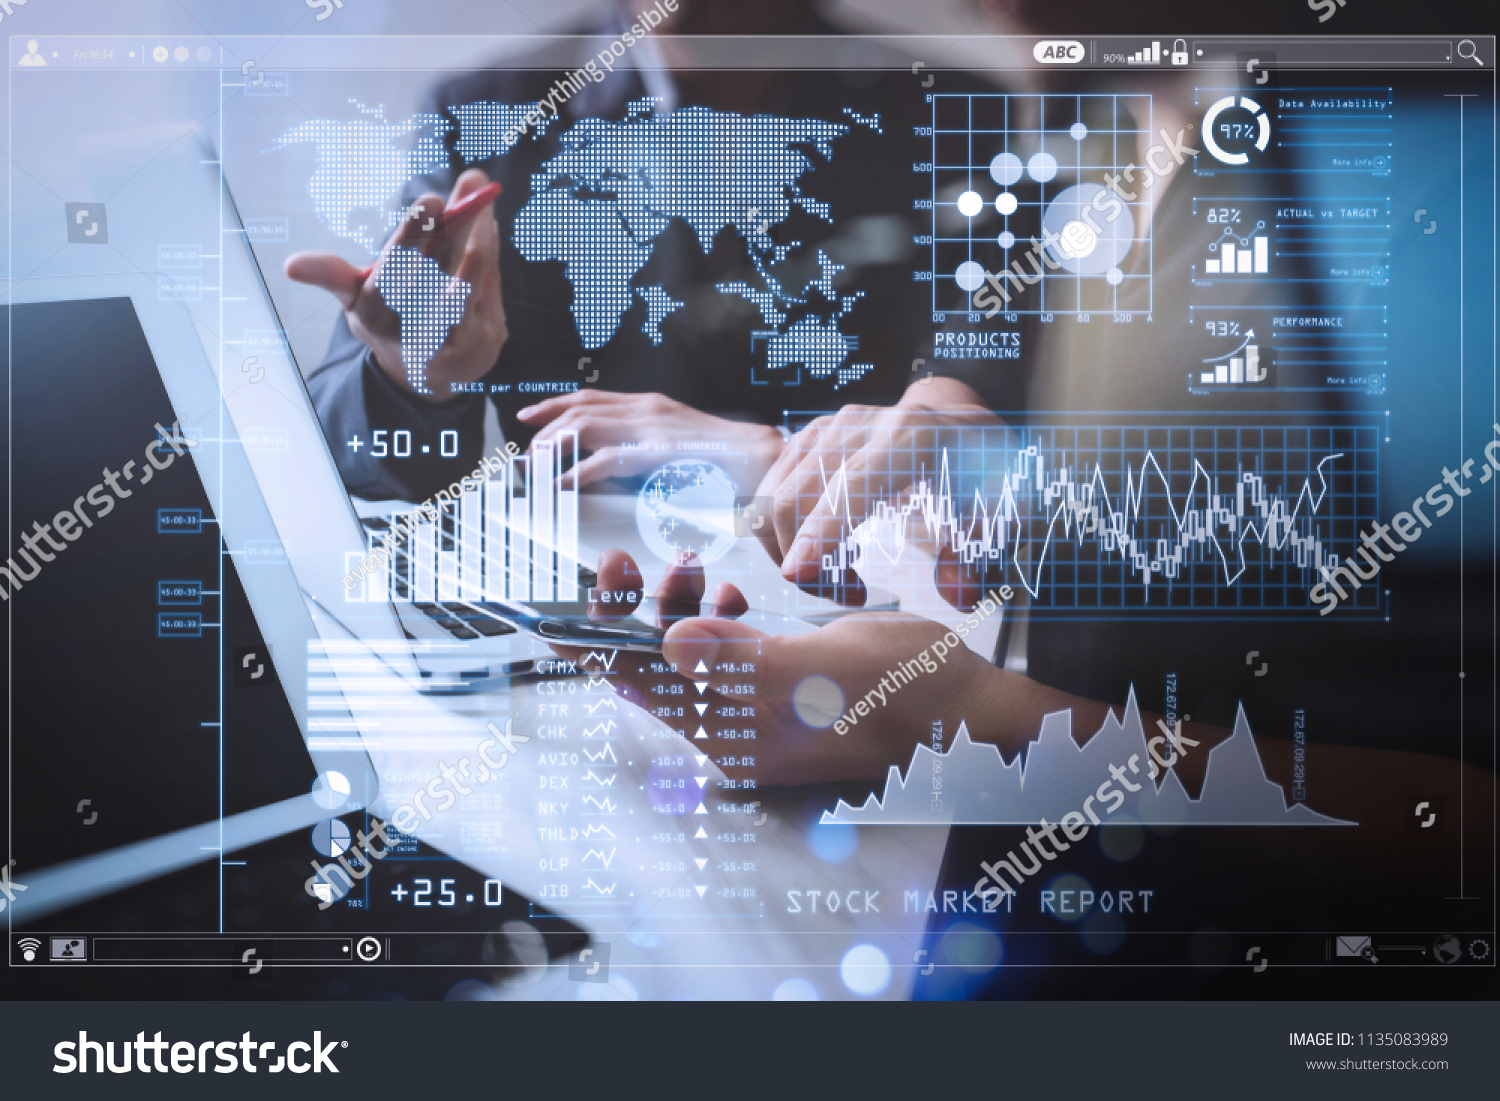 Investor analyzing stock market report and financial dashboard with business intelligence (BI), with key performance indicators (KPI).Business team meeting. Photo professional investor working. #1135083989